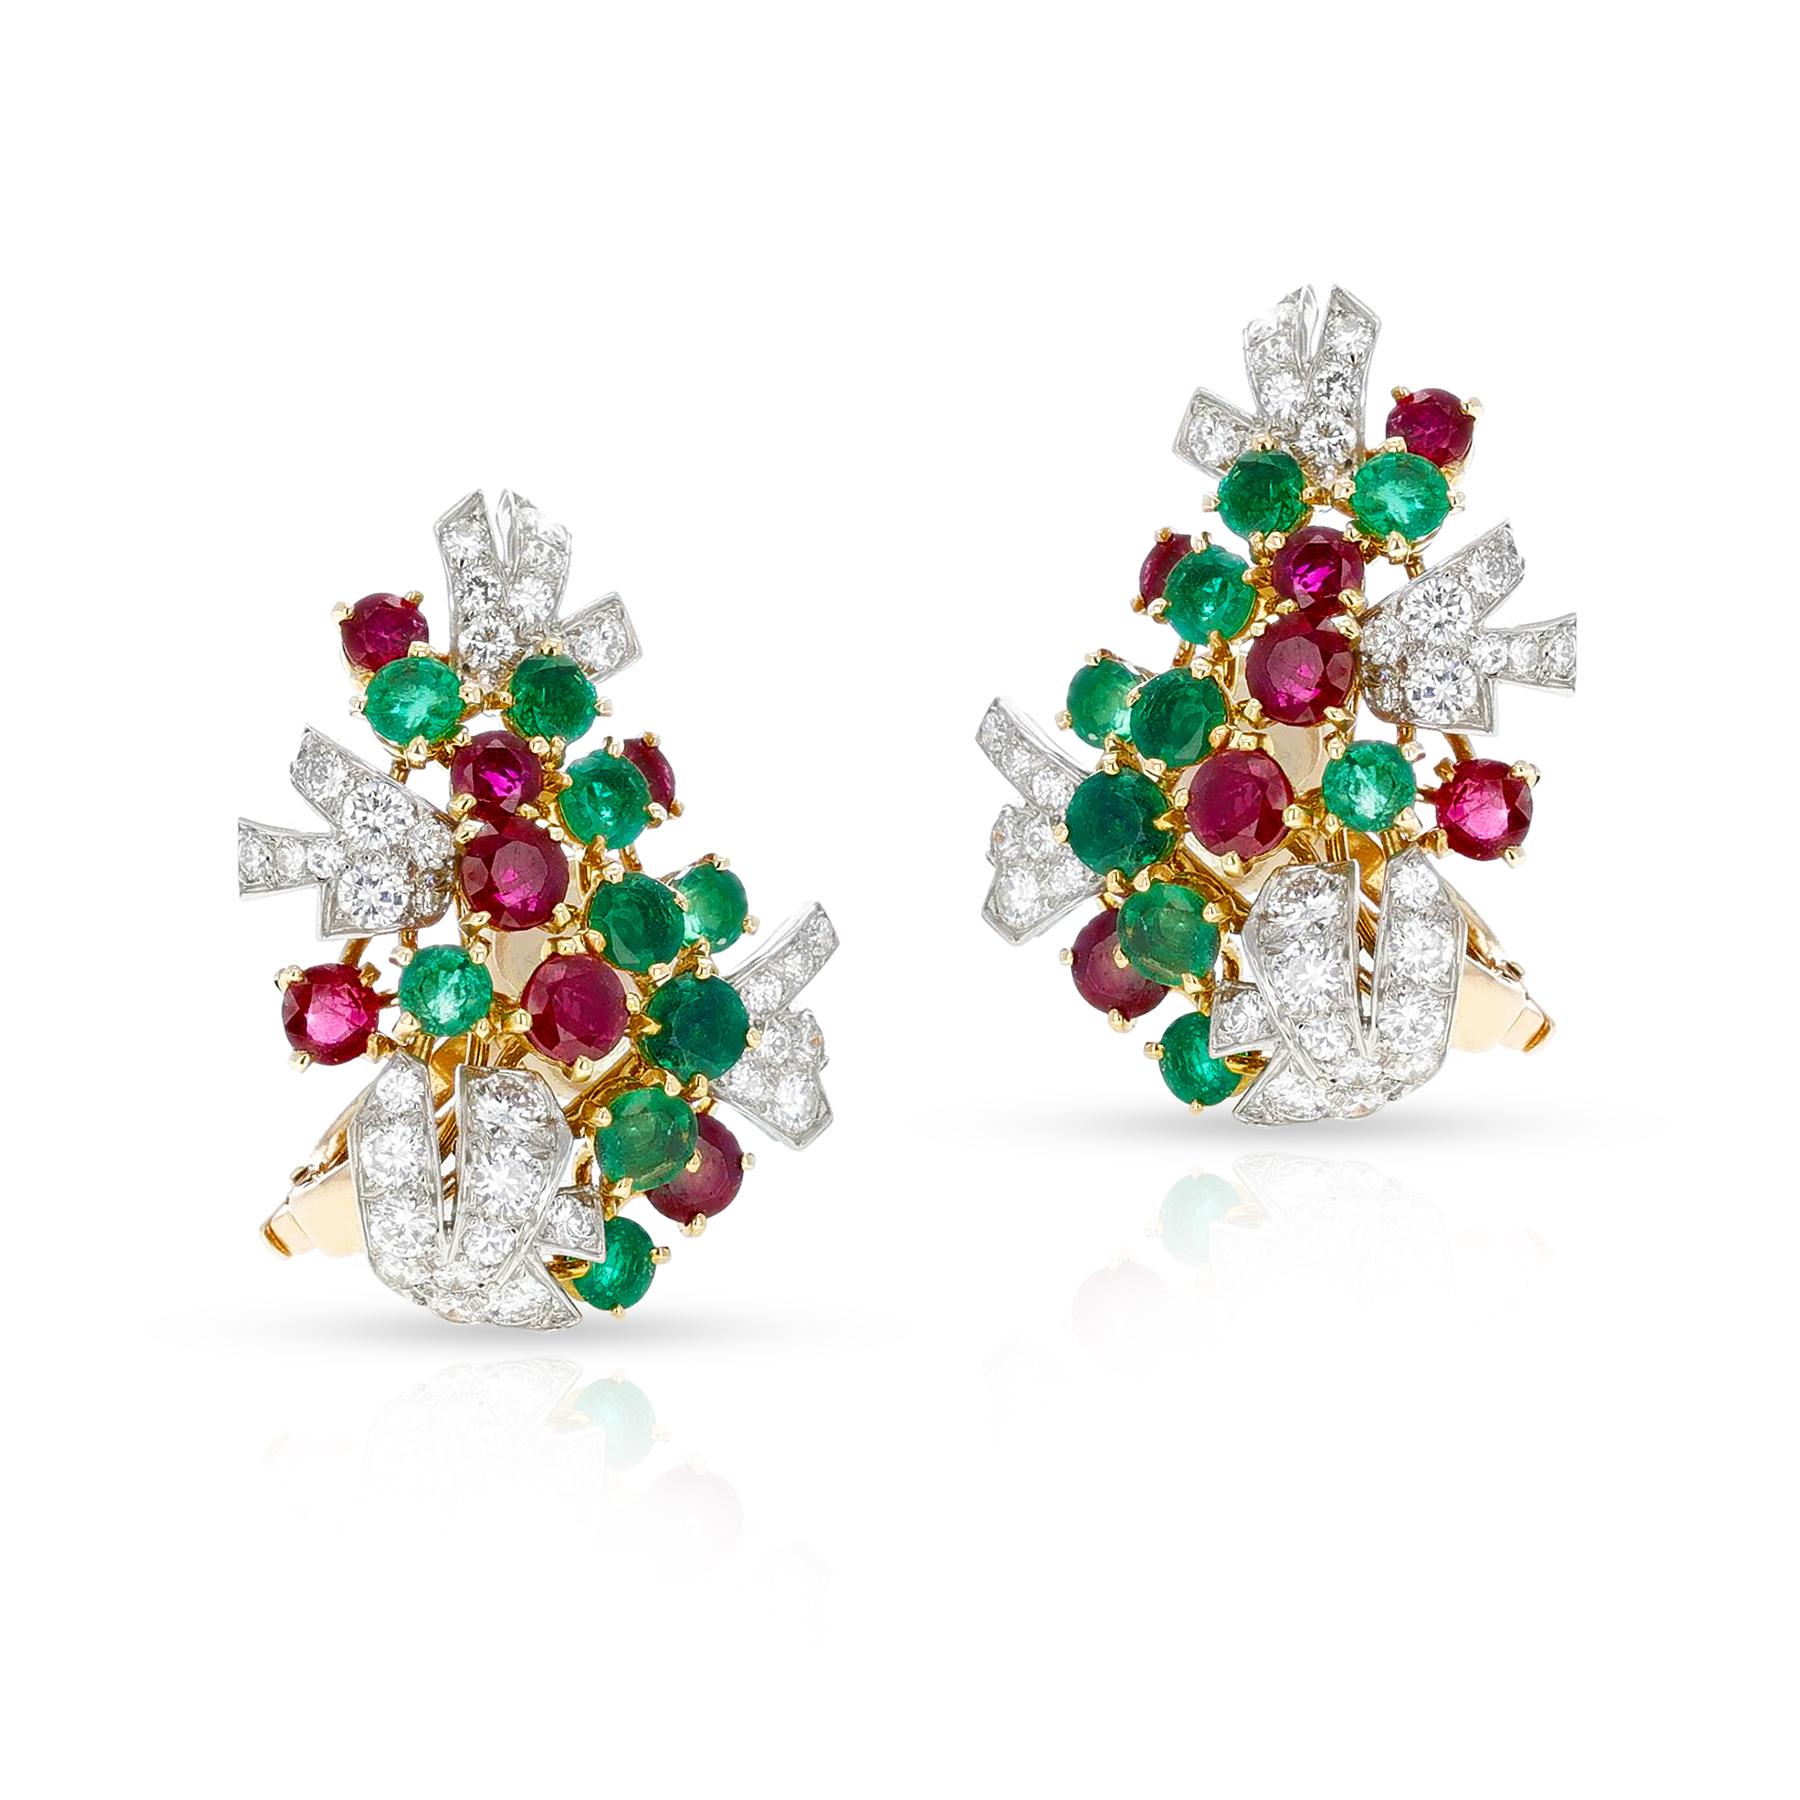 An elegant pair of earrings by Cartier, Paris, which are set with round-shaped emeralds, ruby, and diamonds in platinum and yellow gold. Each earring is signed “Cartier Paris,” numbered, and stamped with the maker’s mark. The length is 1.20 x 0.85